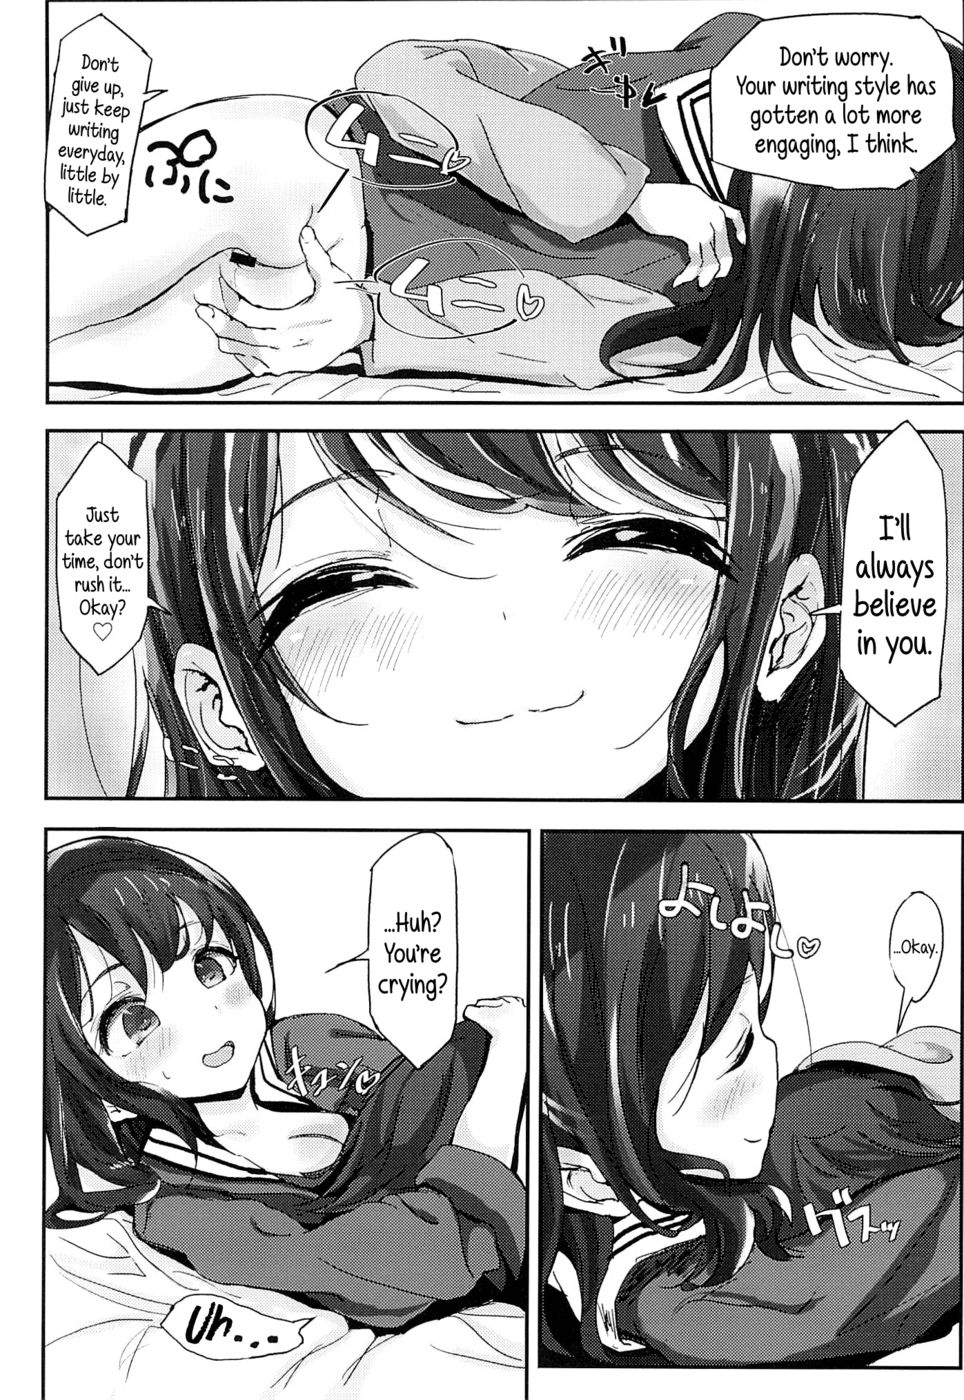 Hentai Manga Comic-Beyond the mouth of the uterus lies Onii-chan's demise-Read-11